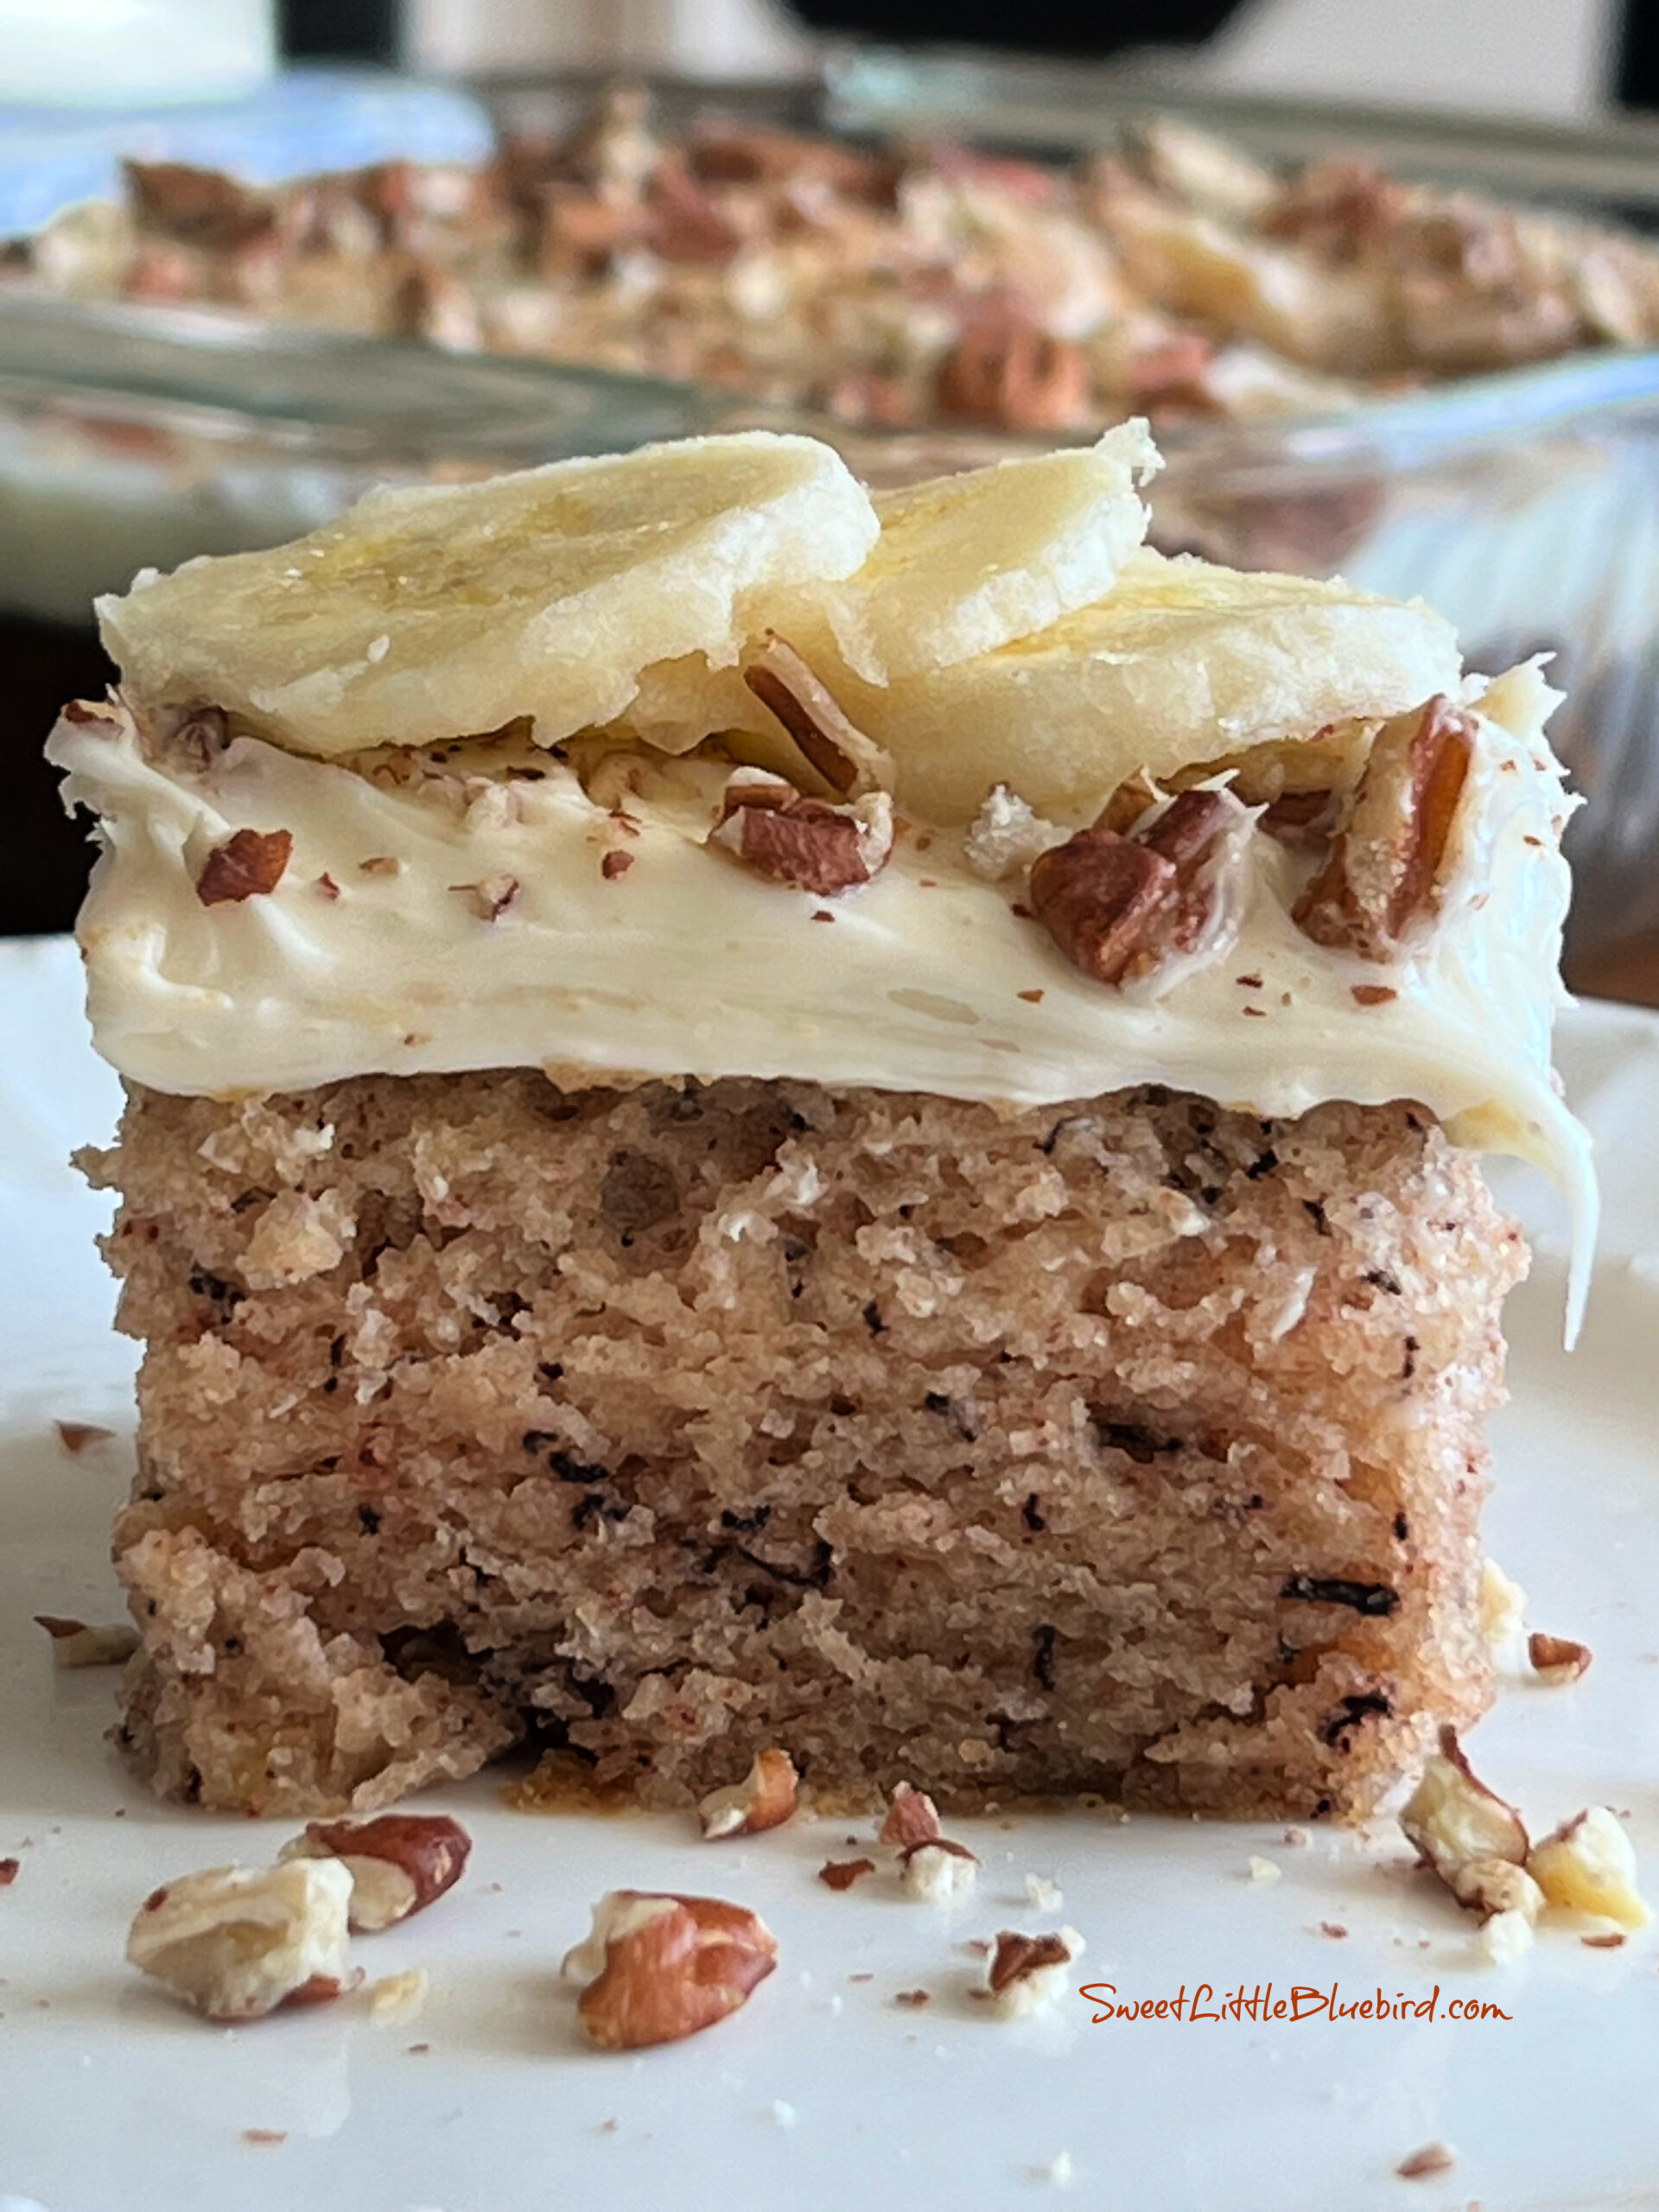 This is a photo of a square piece of Banana Bread Crazy Cake topped with vanilla frosting, chopped pecans and fresh sliced banana.